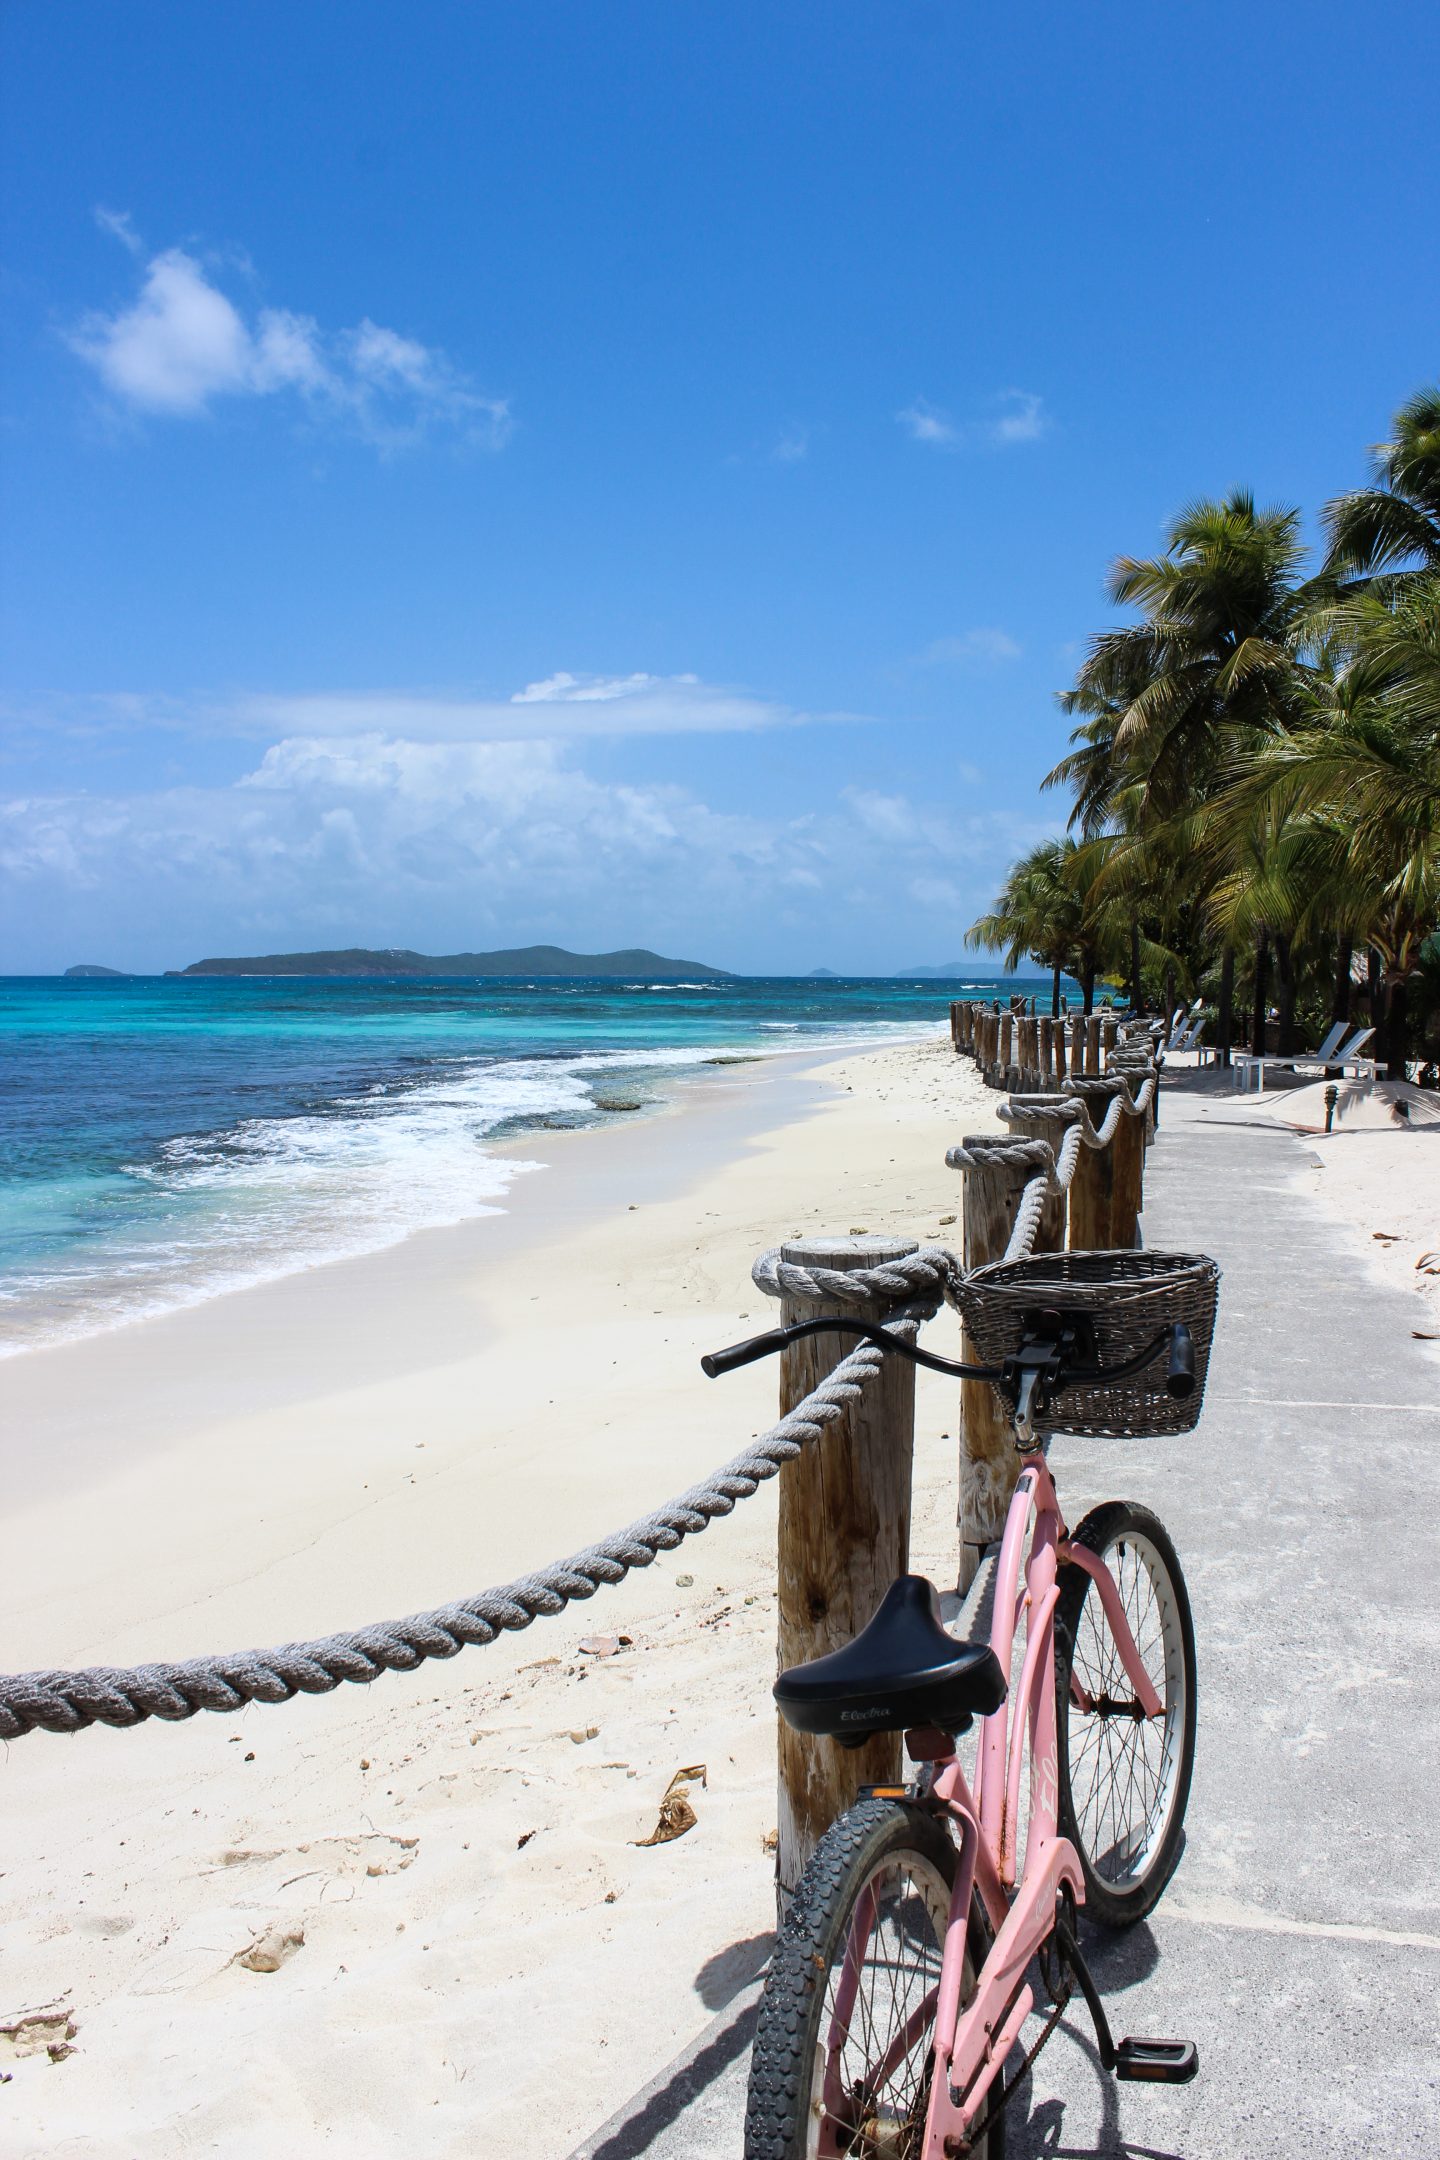 Clutch and carry on - UK Travel blogger - palm island resort, grenadines (109 of 361)